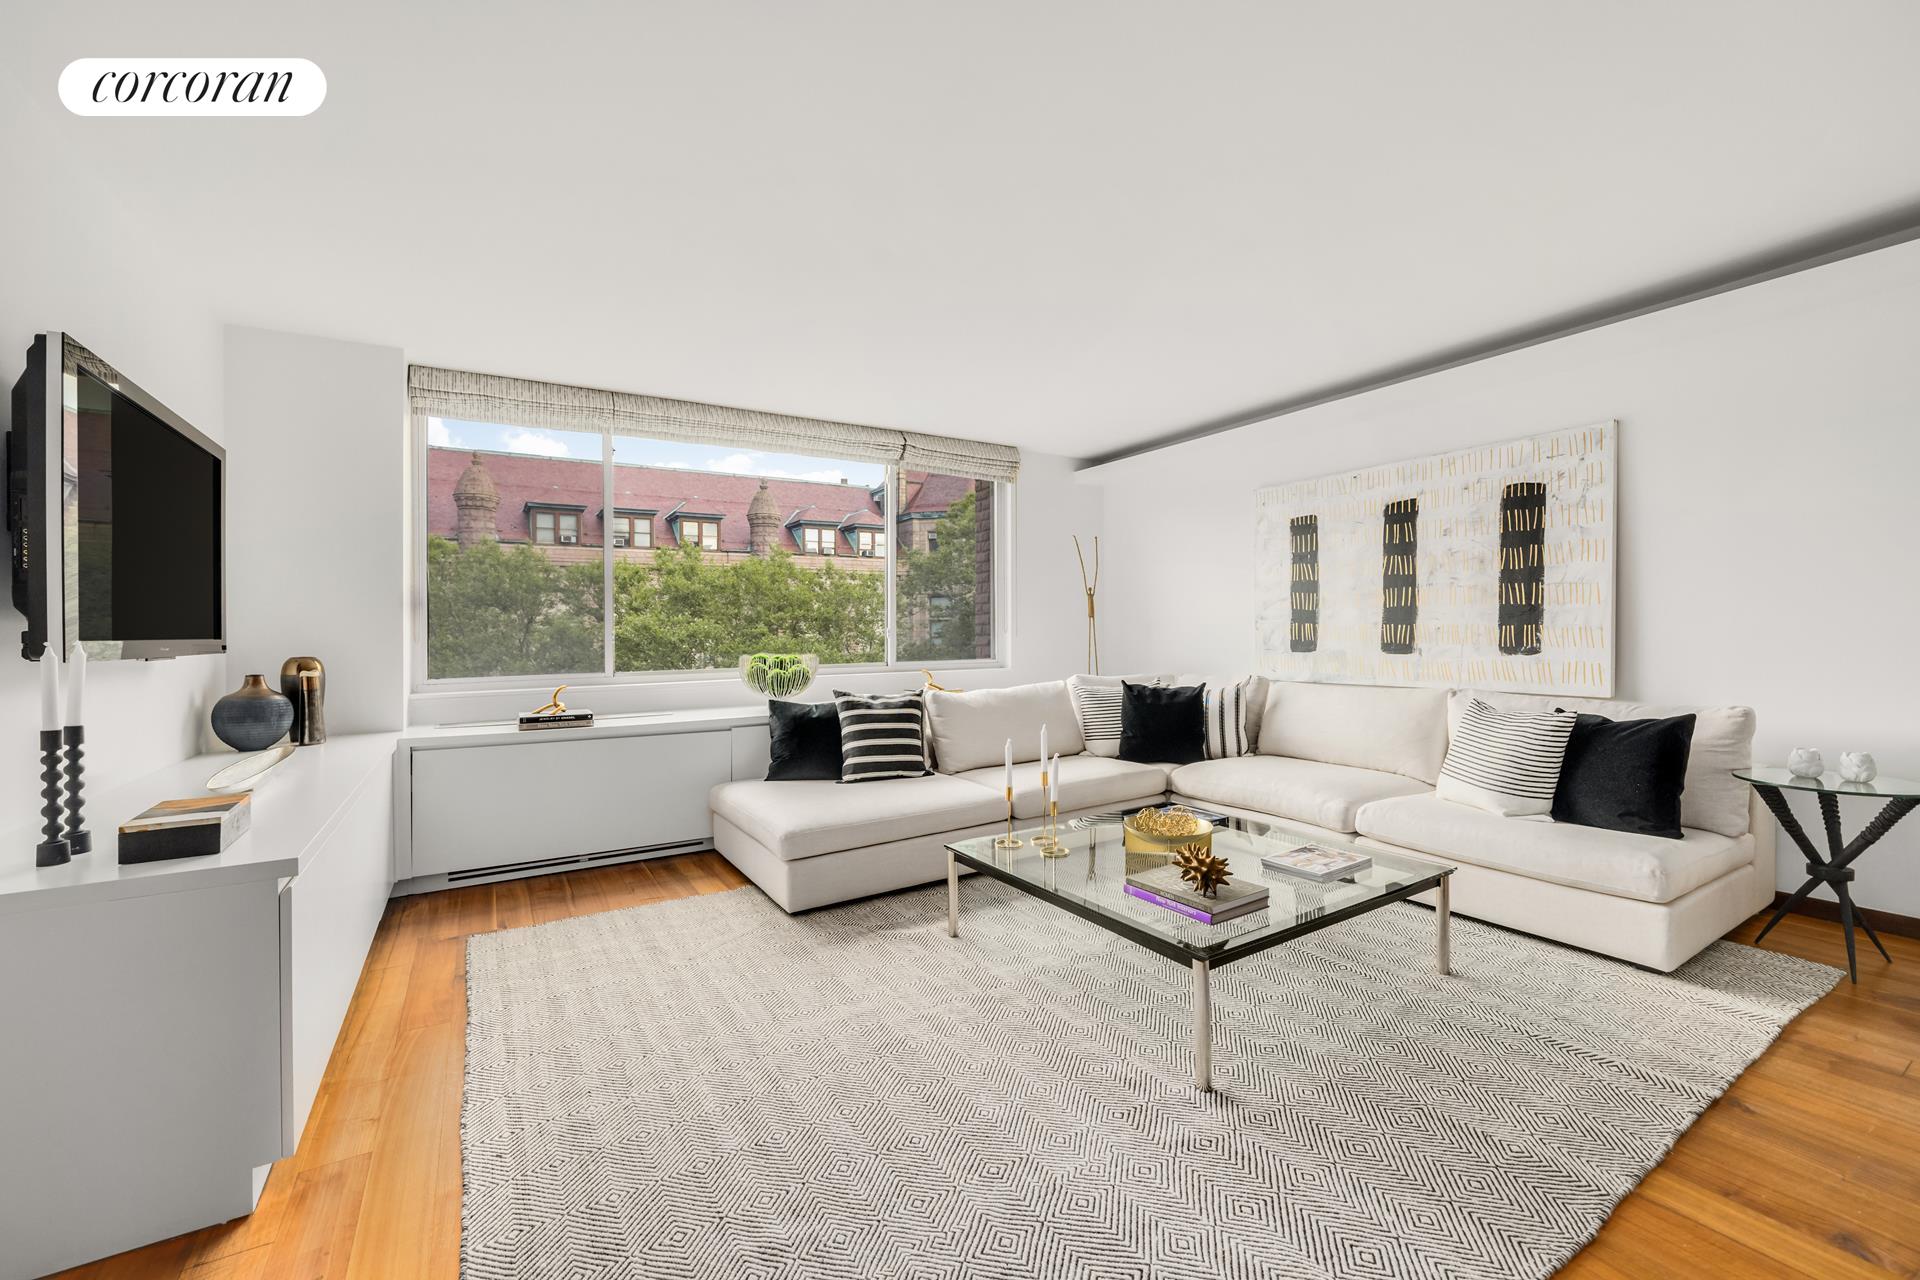 386 Columbus Avenue 7A, Upper West Side, Upper West Side, NYC - 2 Bedrooms  
2 Bathrooms  
4 Rooms - 